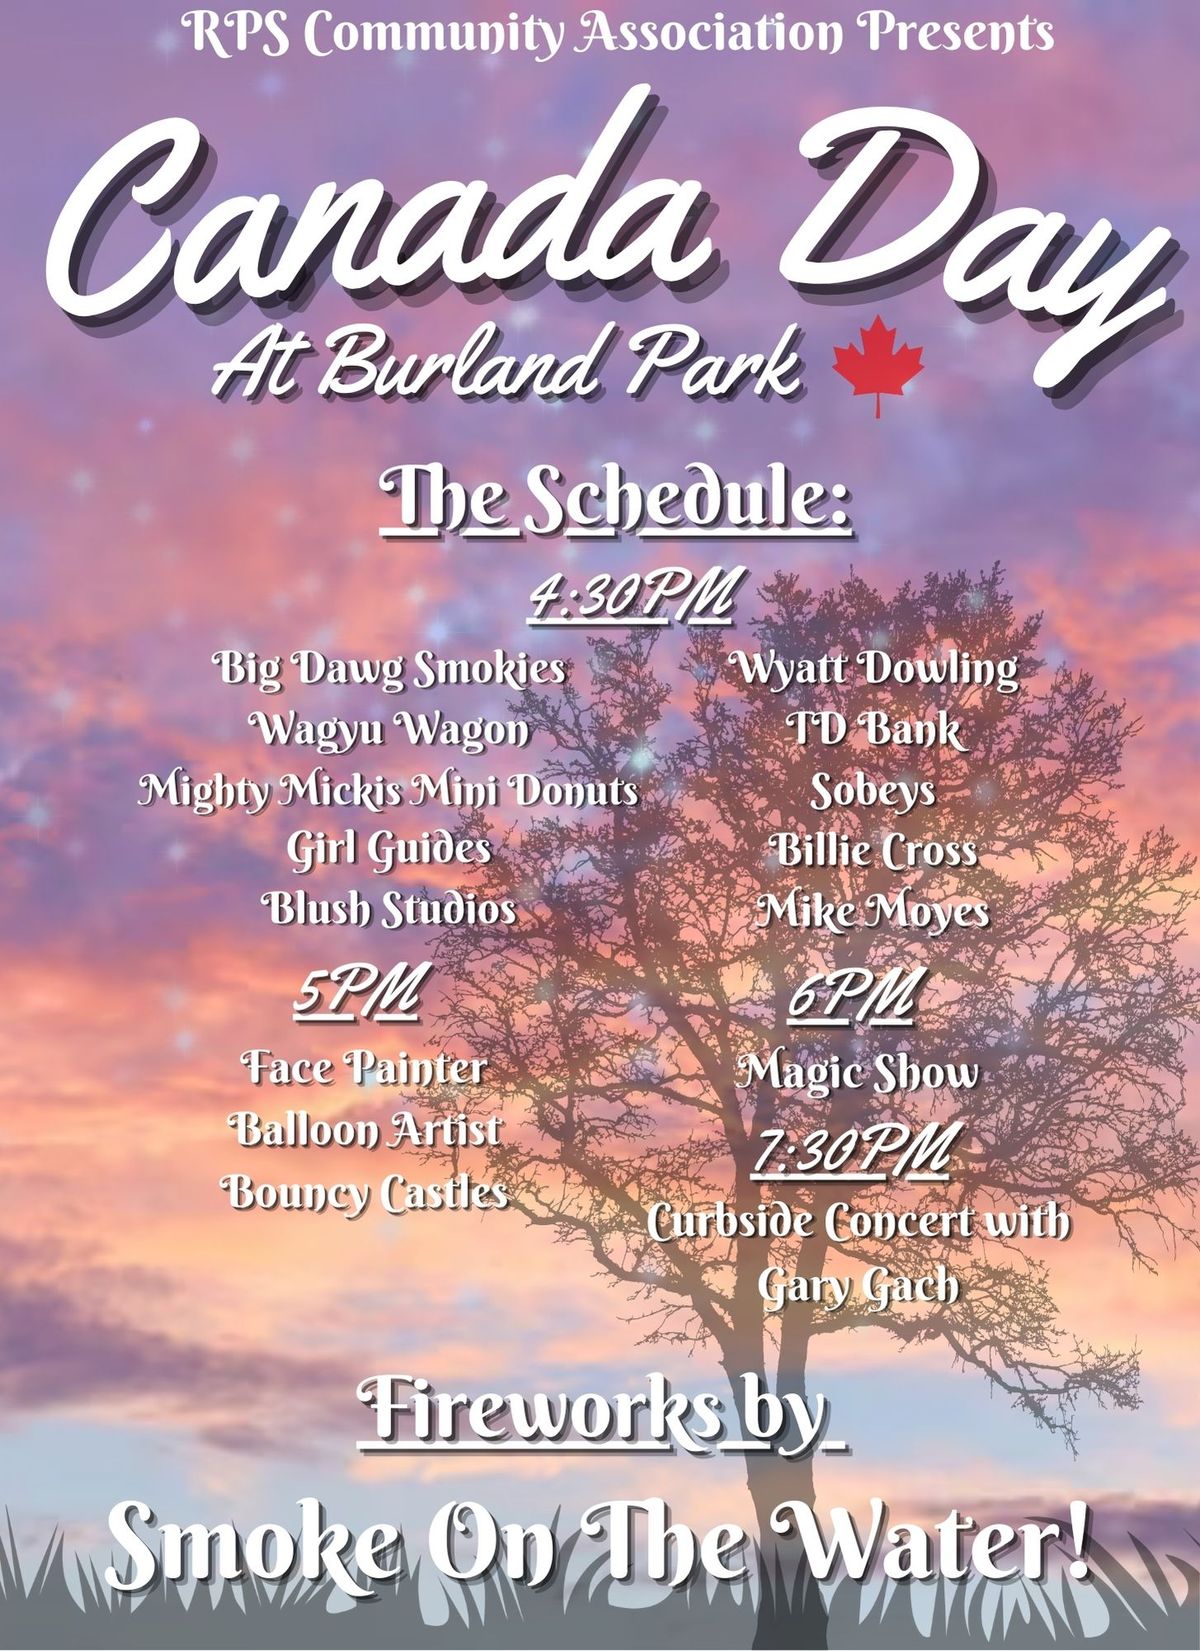 Canada Day at Burland Park! 